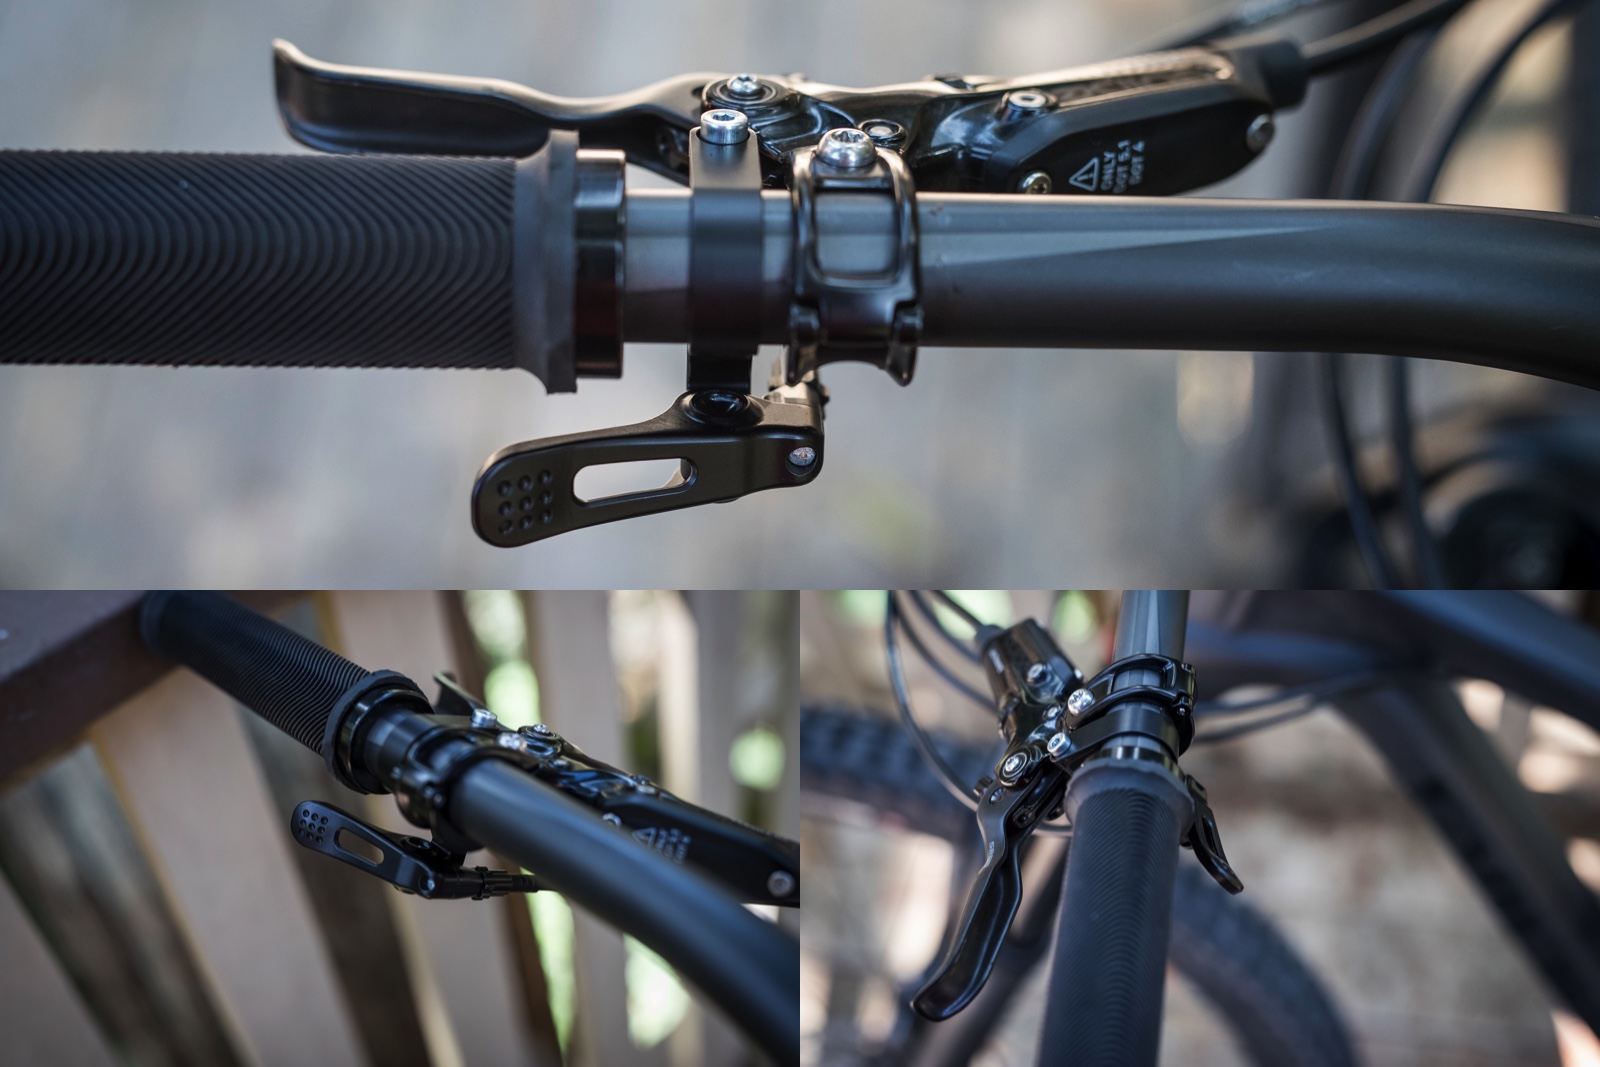 A standout features on the fall line is its lever options.  There is a brake lever style pull lever and a thumb paddle style available as well as a 1X style adapter which we chose.